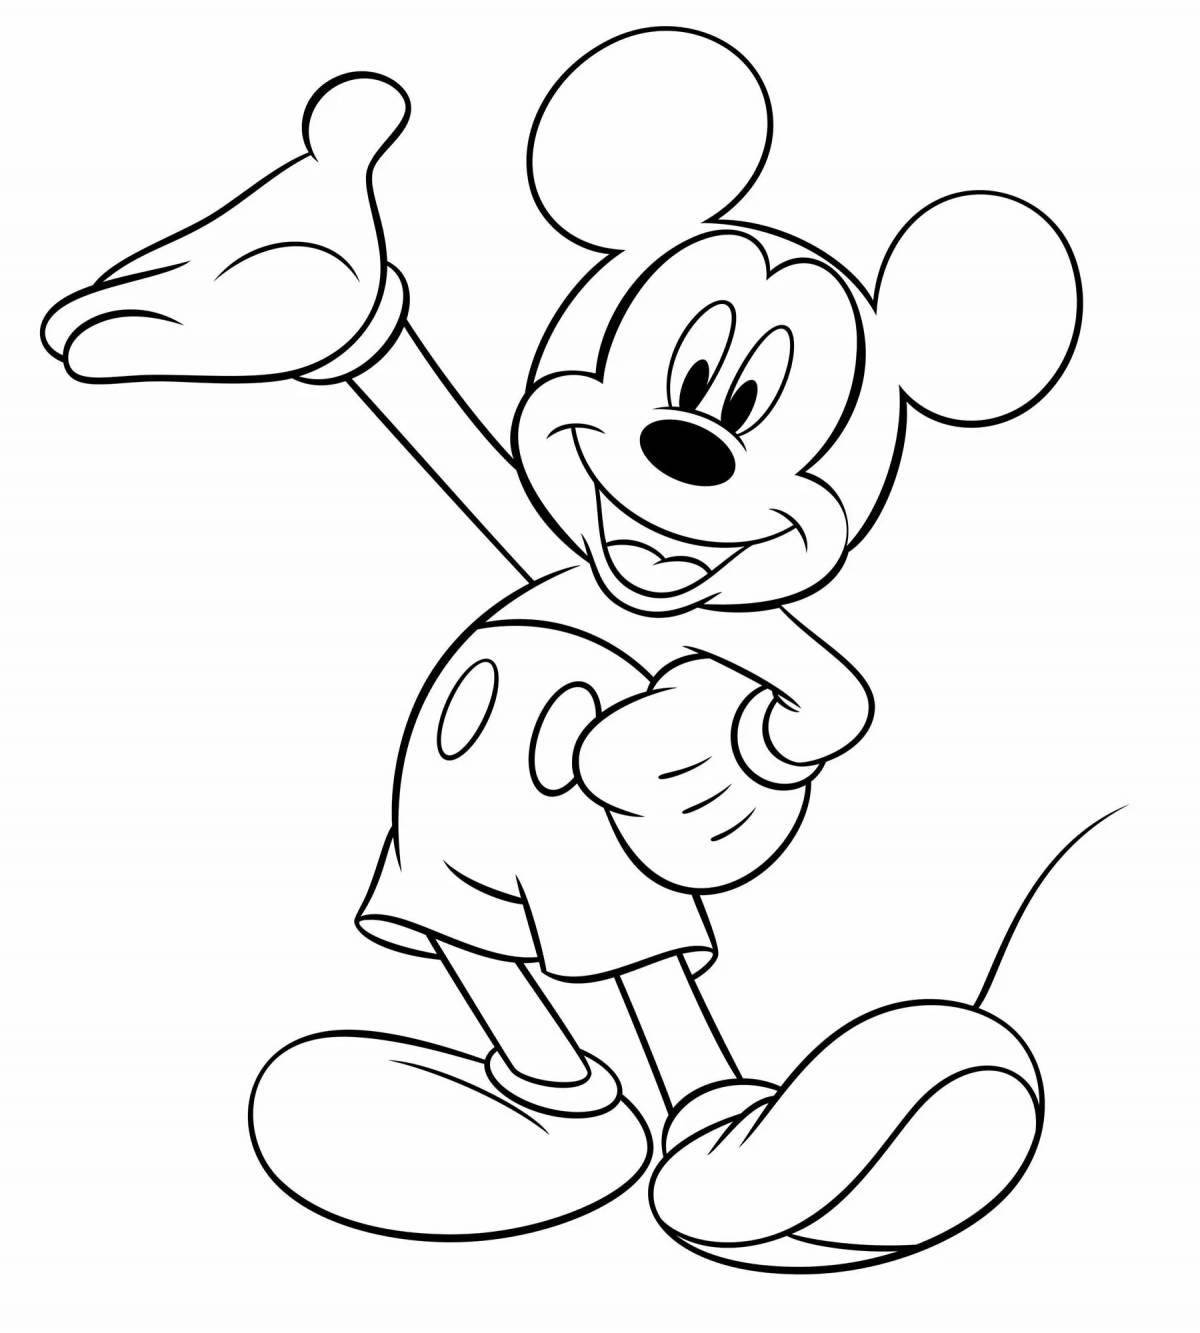 Coloring book with funny cartoon characters for children 6-7 years old